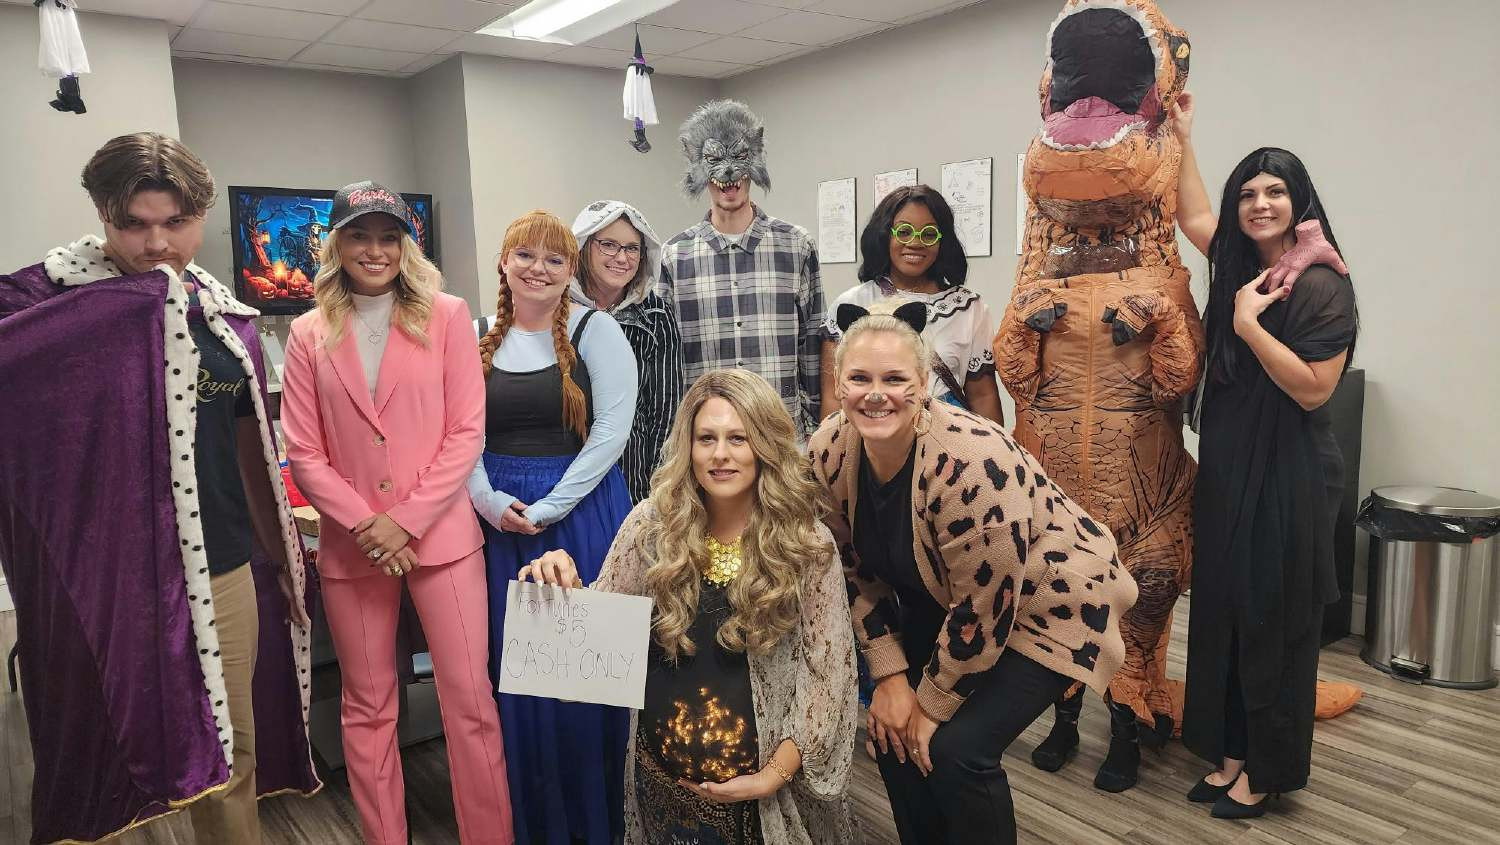 Each office enjoys showing off their creativity on Halloween.  This picture shows some great costumes in our Katy office